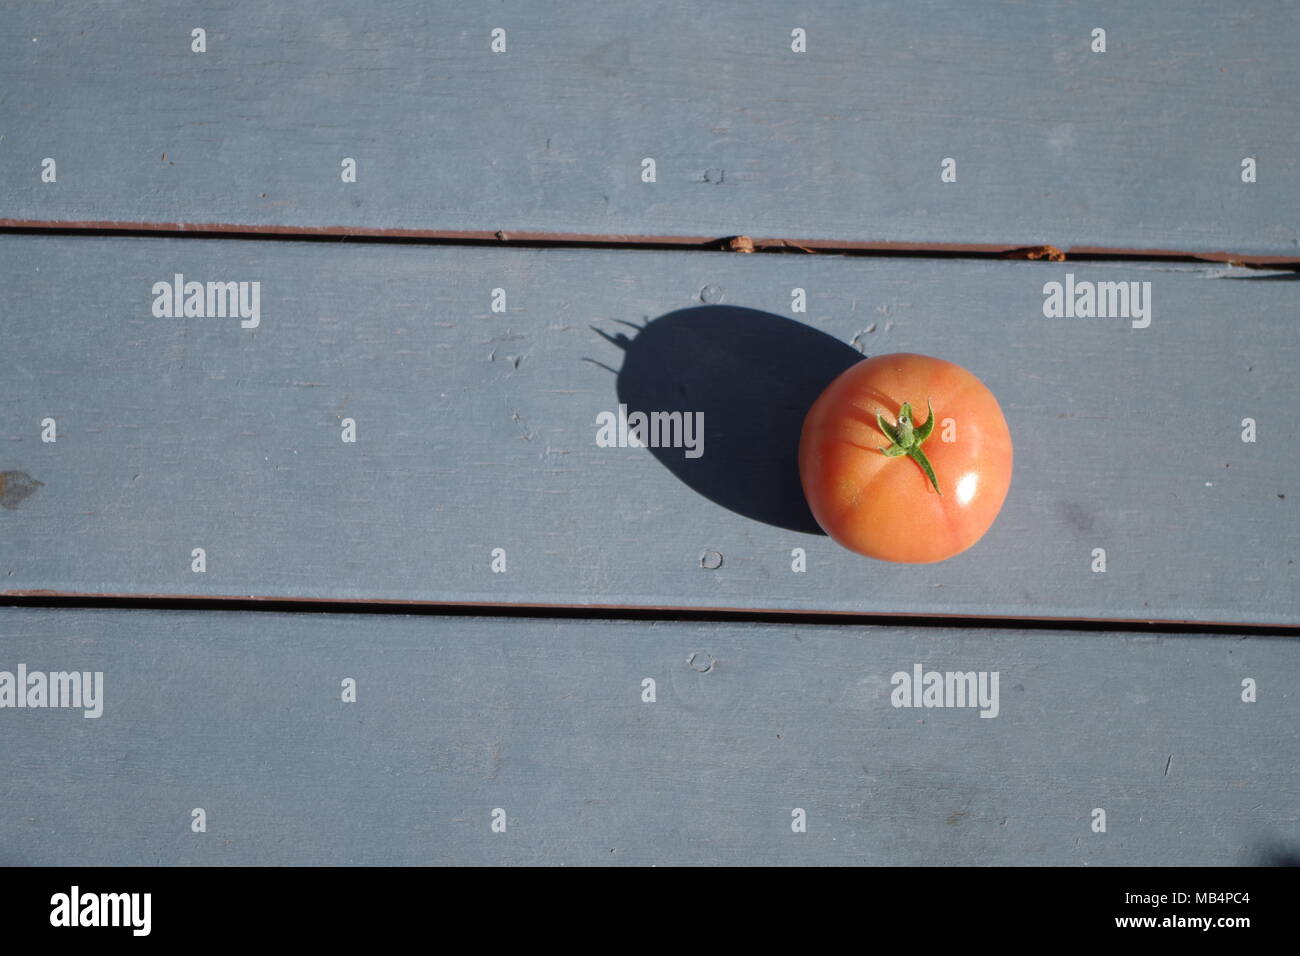 A tomato casting a shadow into a blue painted wood background, Minimalism photo. Stock Photo